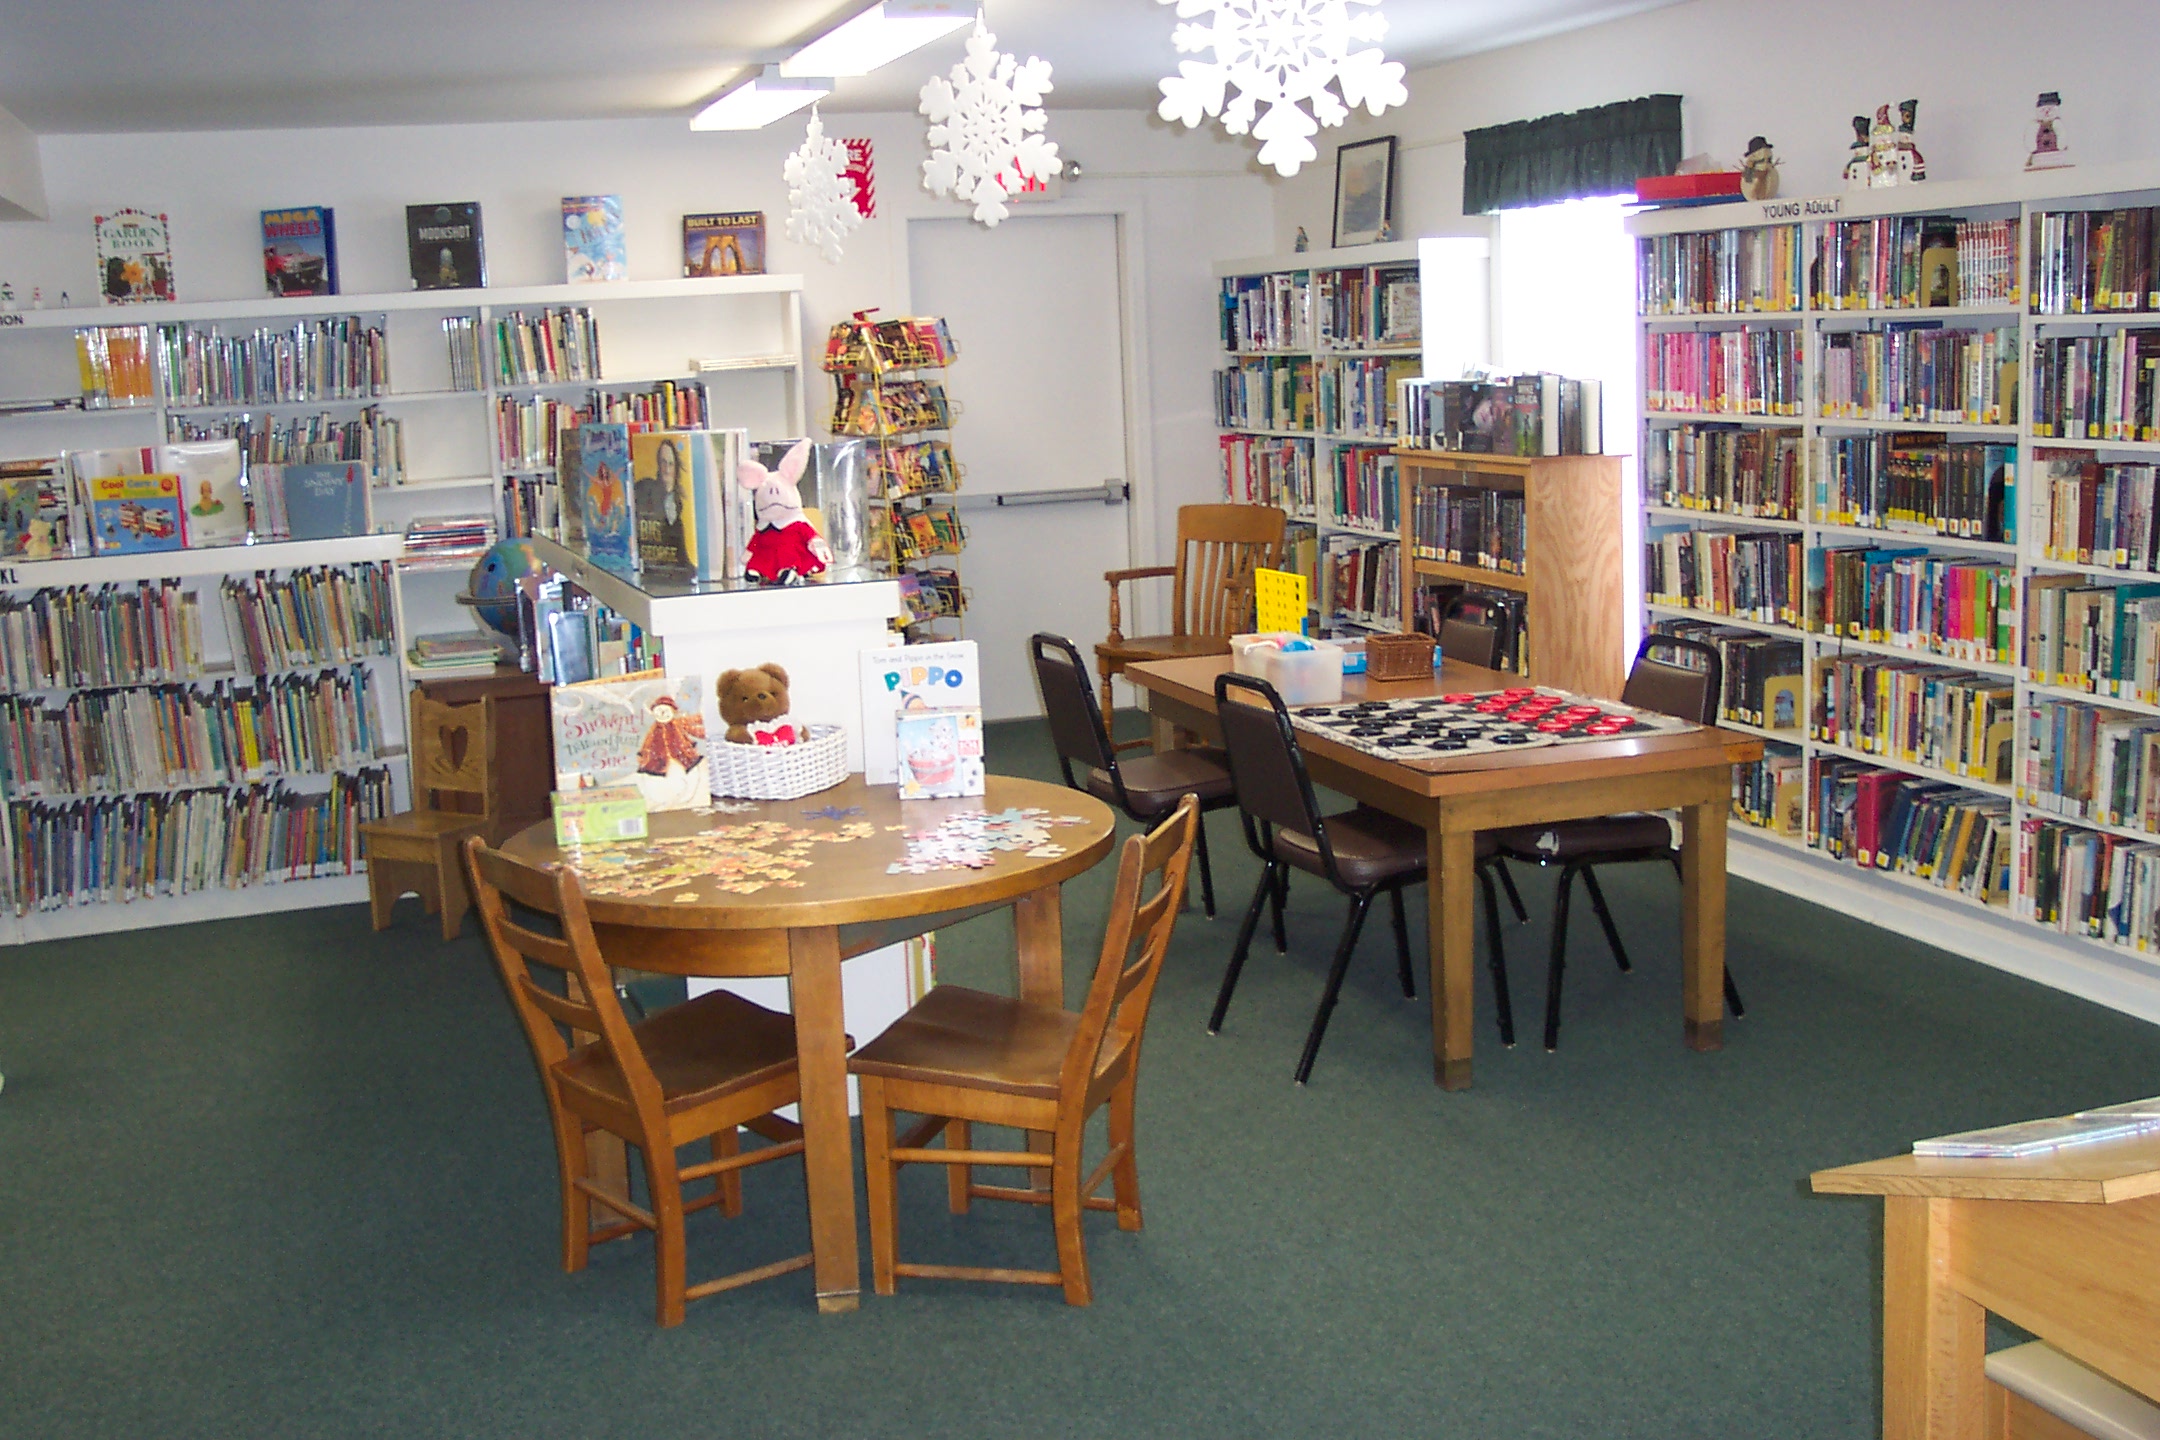 The Library and Childrens Services